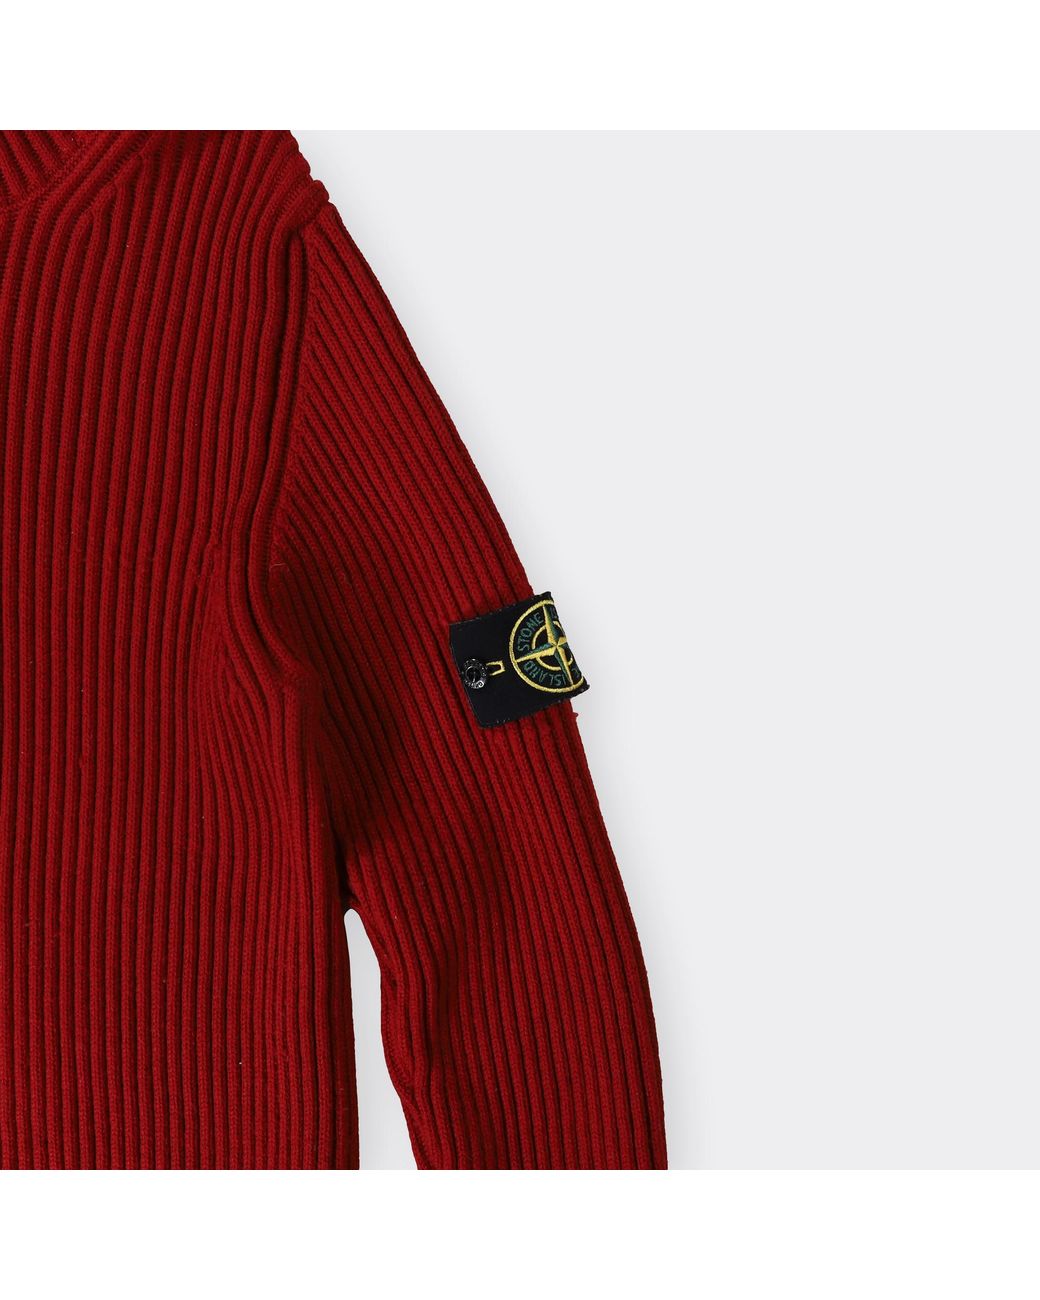 Stone Island Vintage Sweater in Red for Men | Lyst